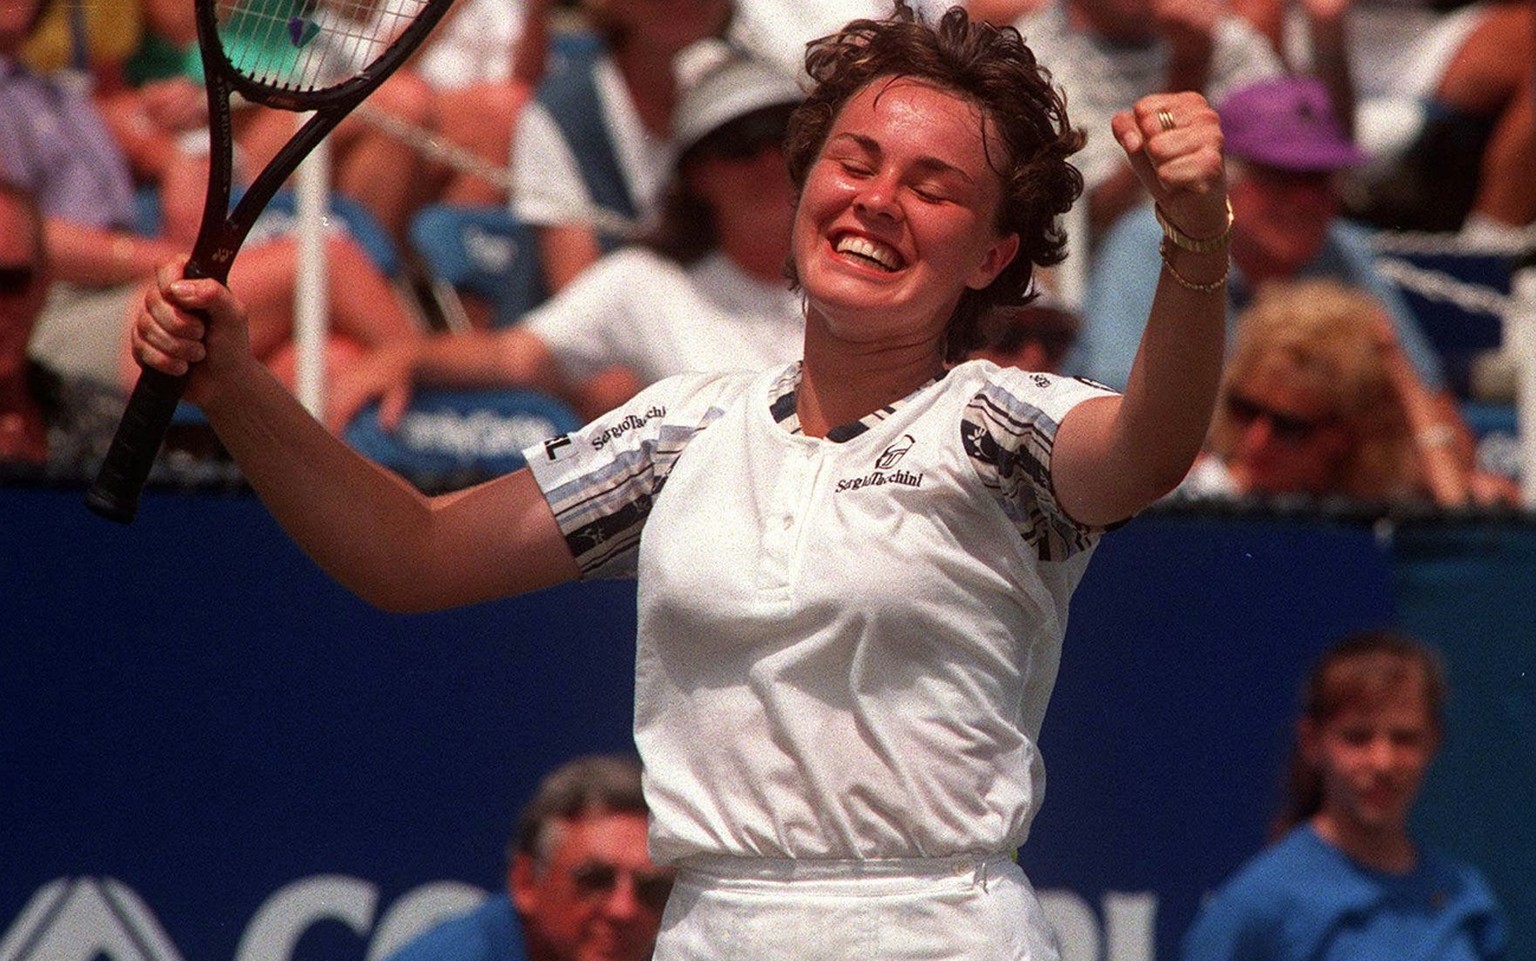 A jubilant Martina Hingis celebrates her win over Monica Seles at the Family Circle Cup on Hilton Head Island, S.C. Sunday April 6, 1997. After losing the first set, Hingis came back to win the second ...